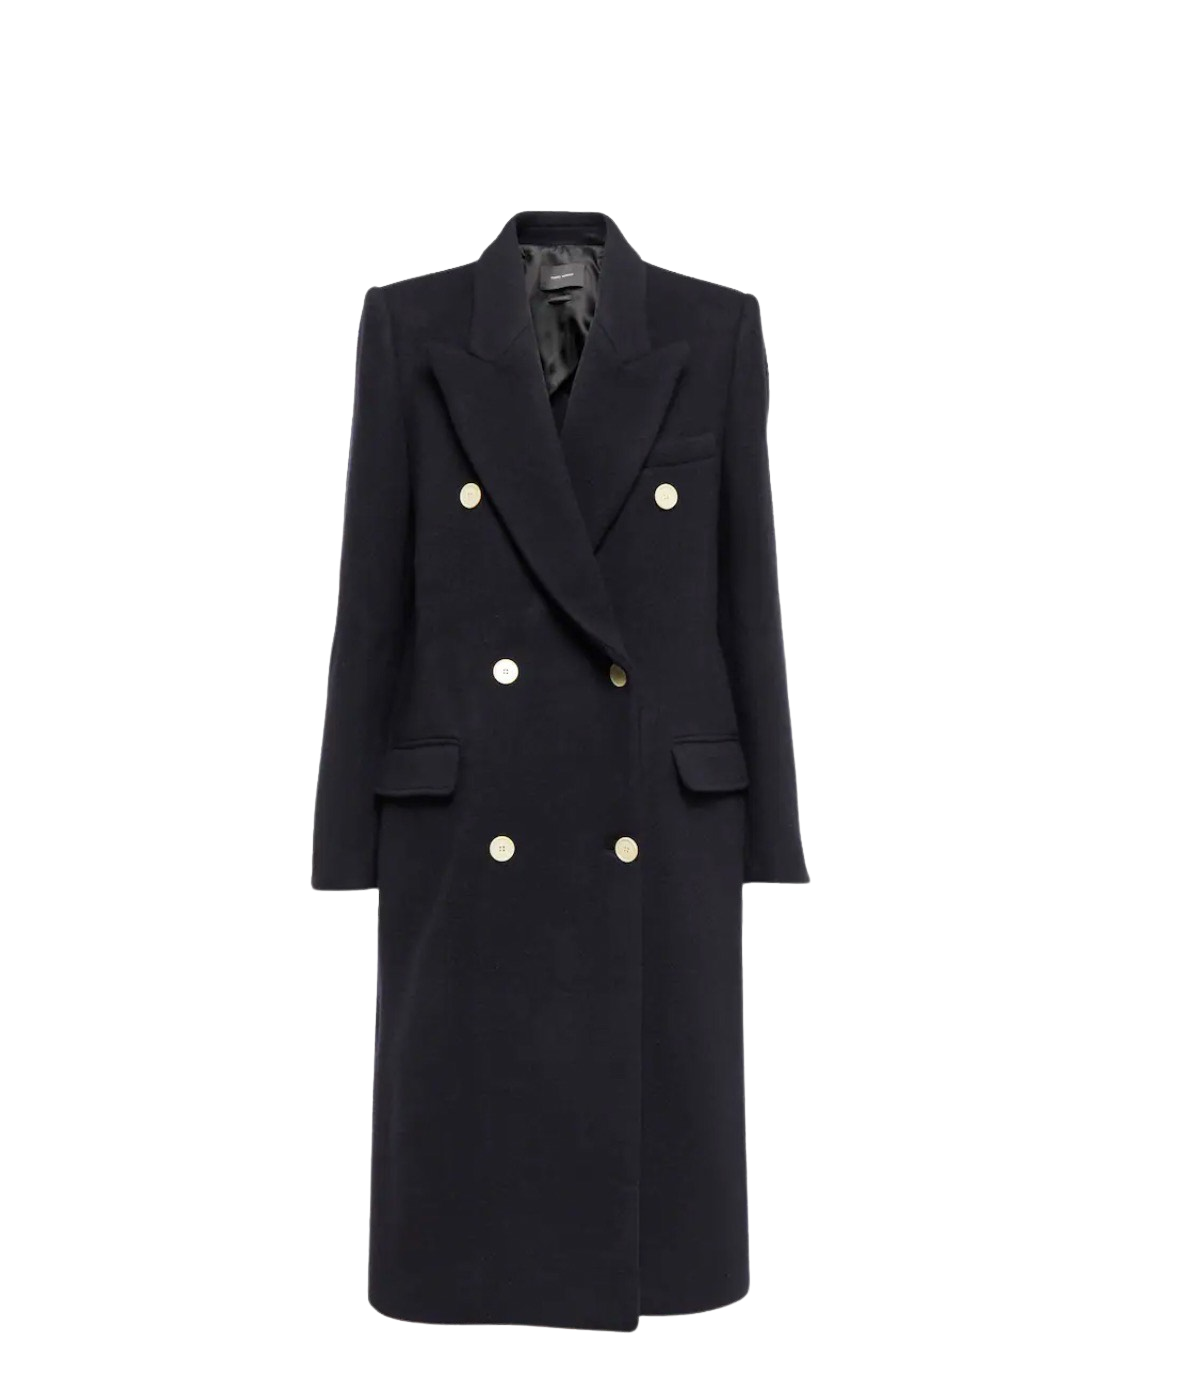 Enarryli Wool and Cashmere Coat